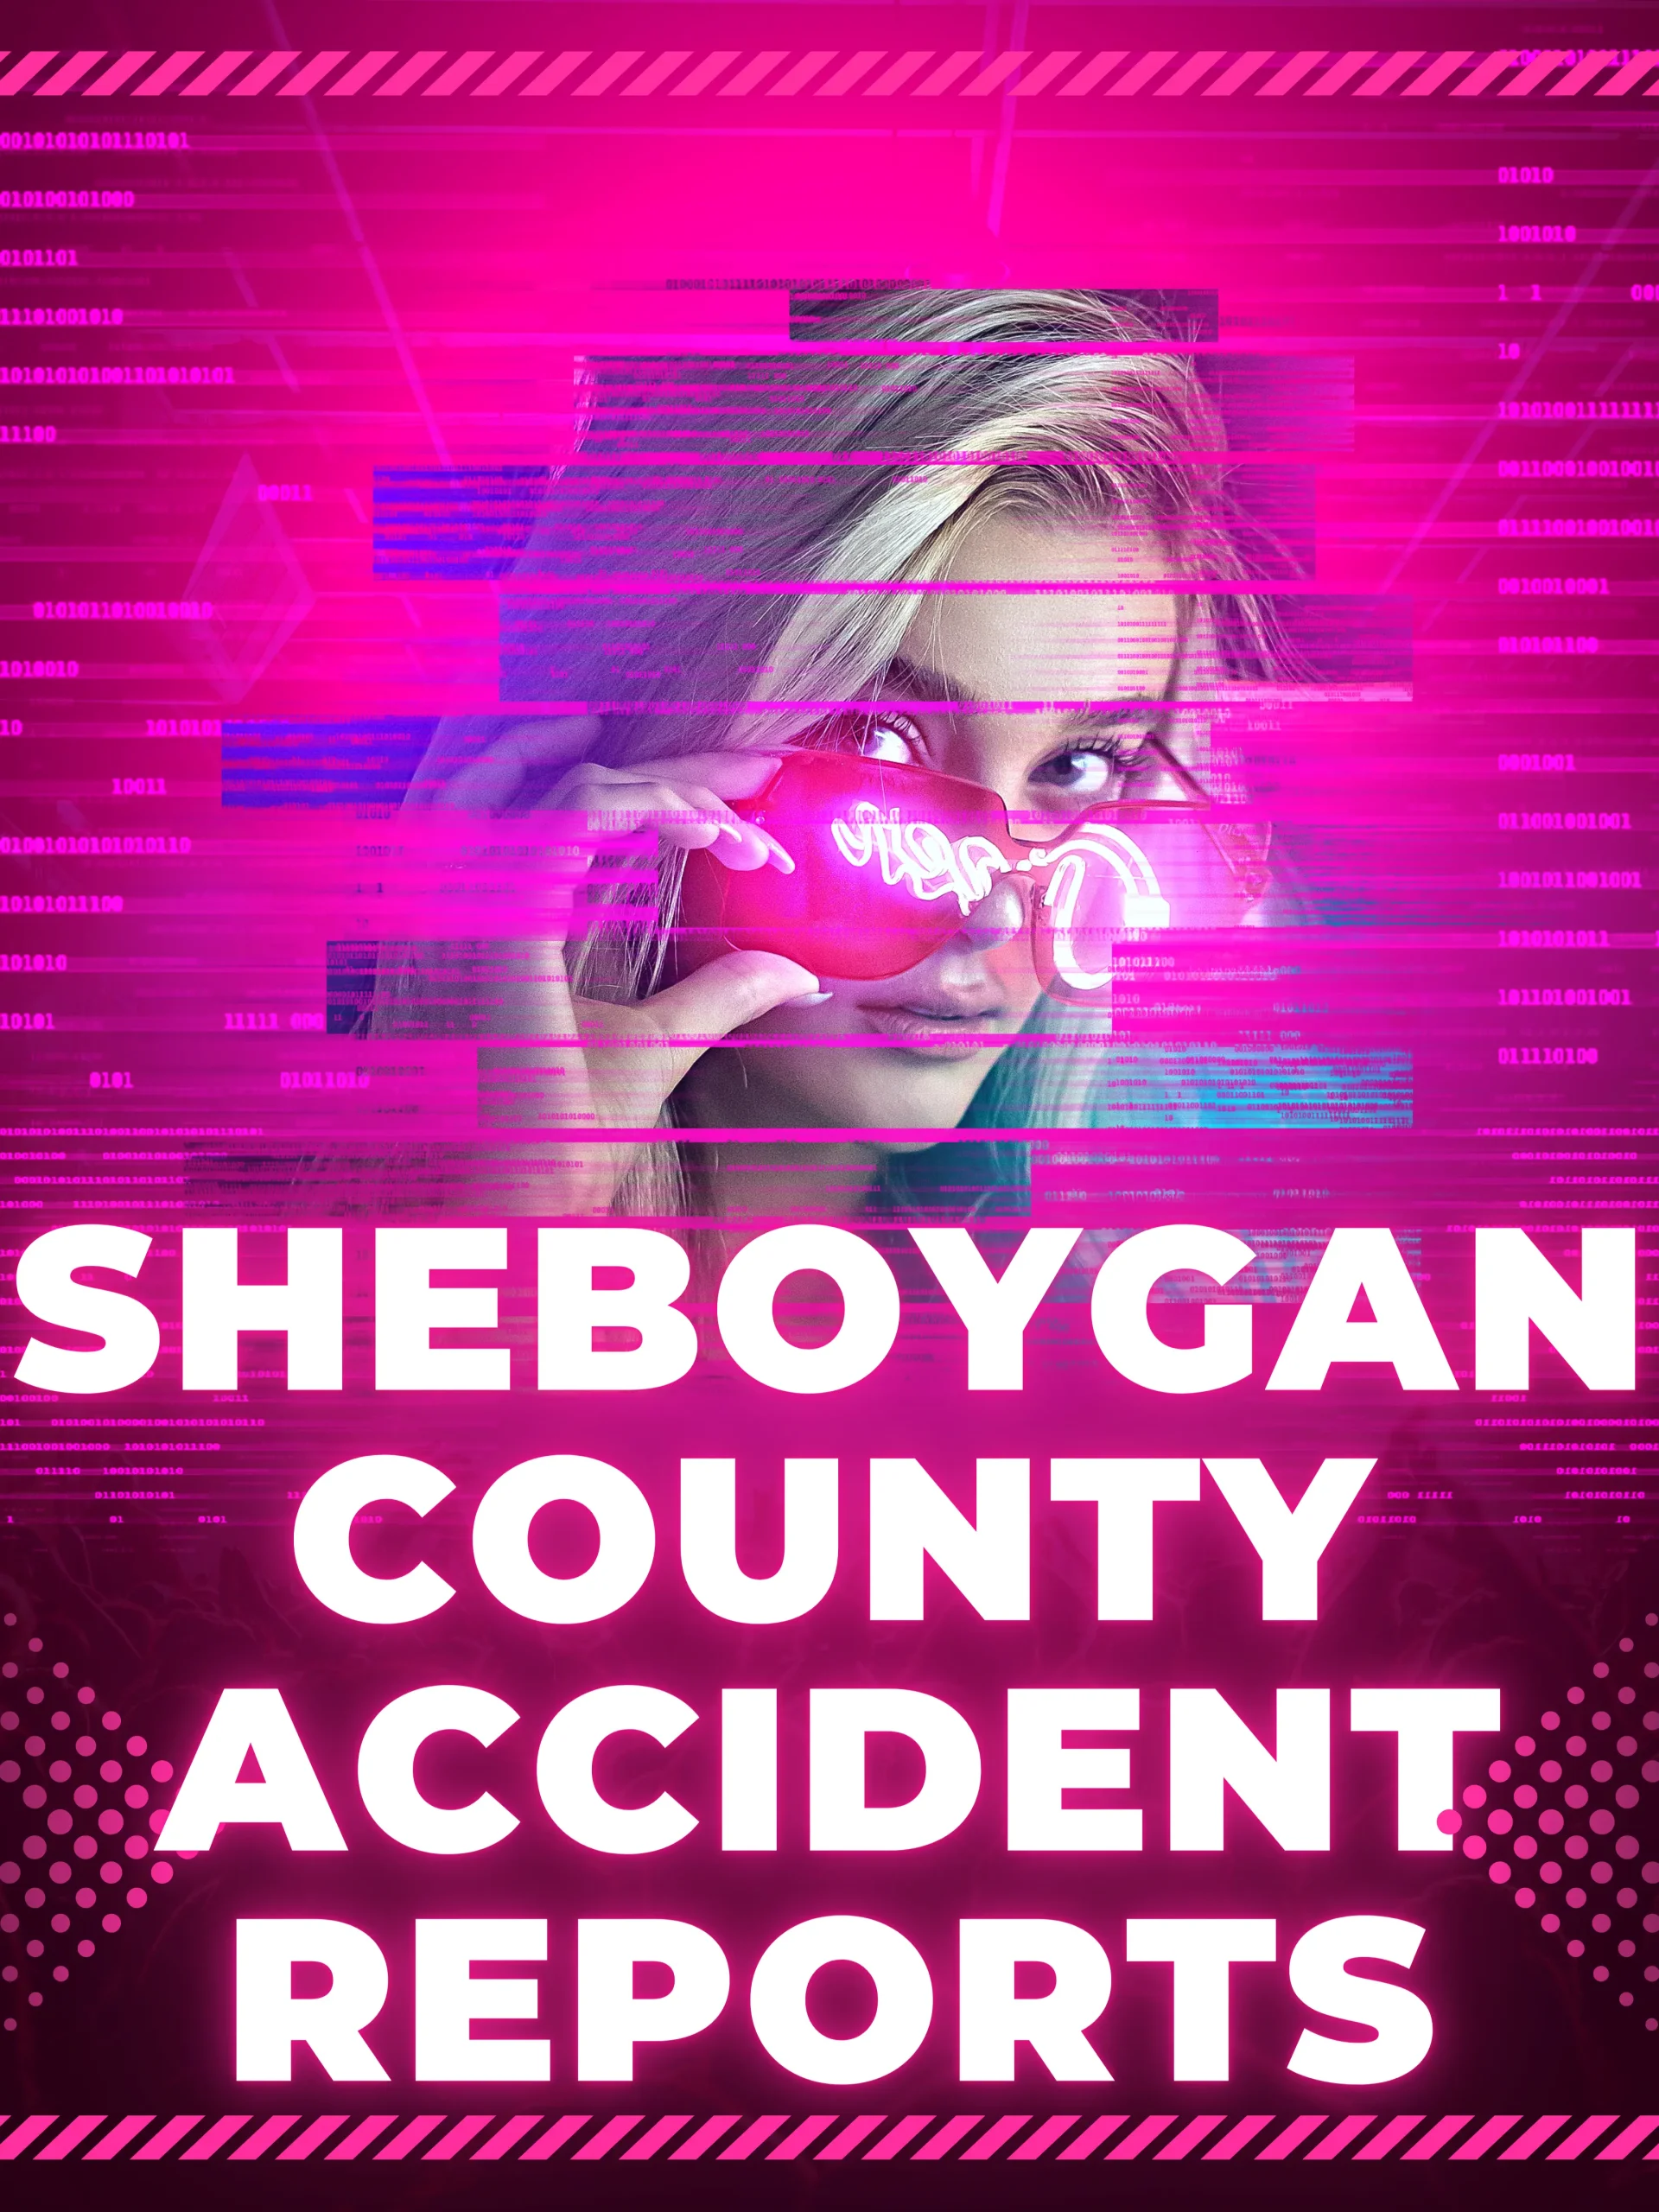 Sheboygan County Accident Reports